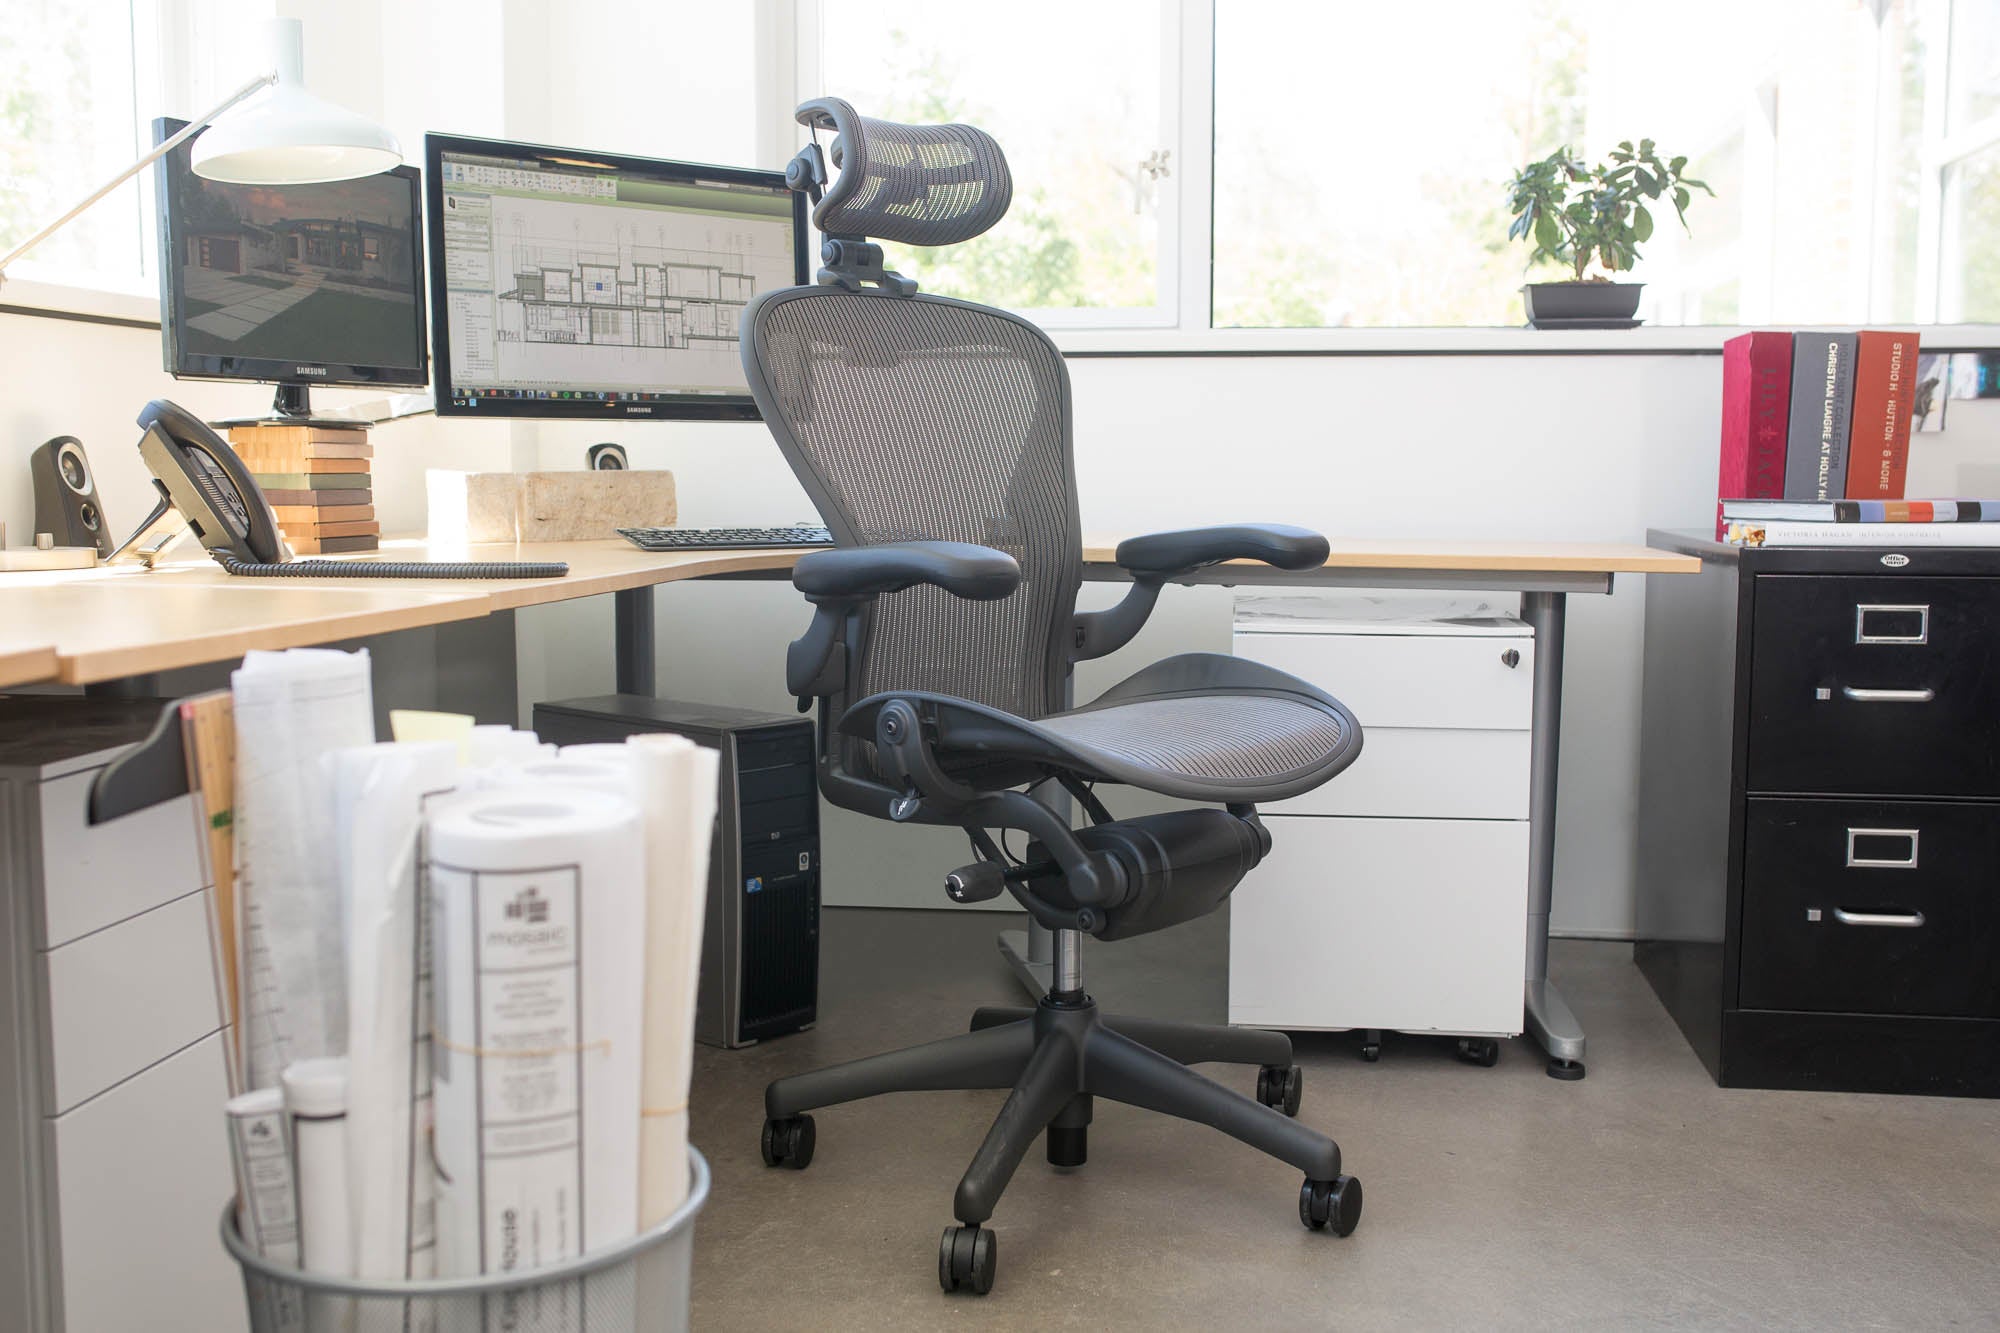 What's An Ergonomic Office Chair? Why Do You Need One?